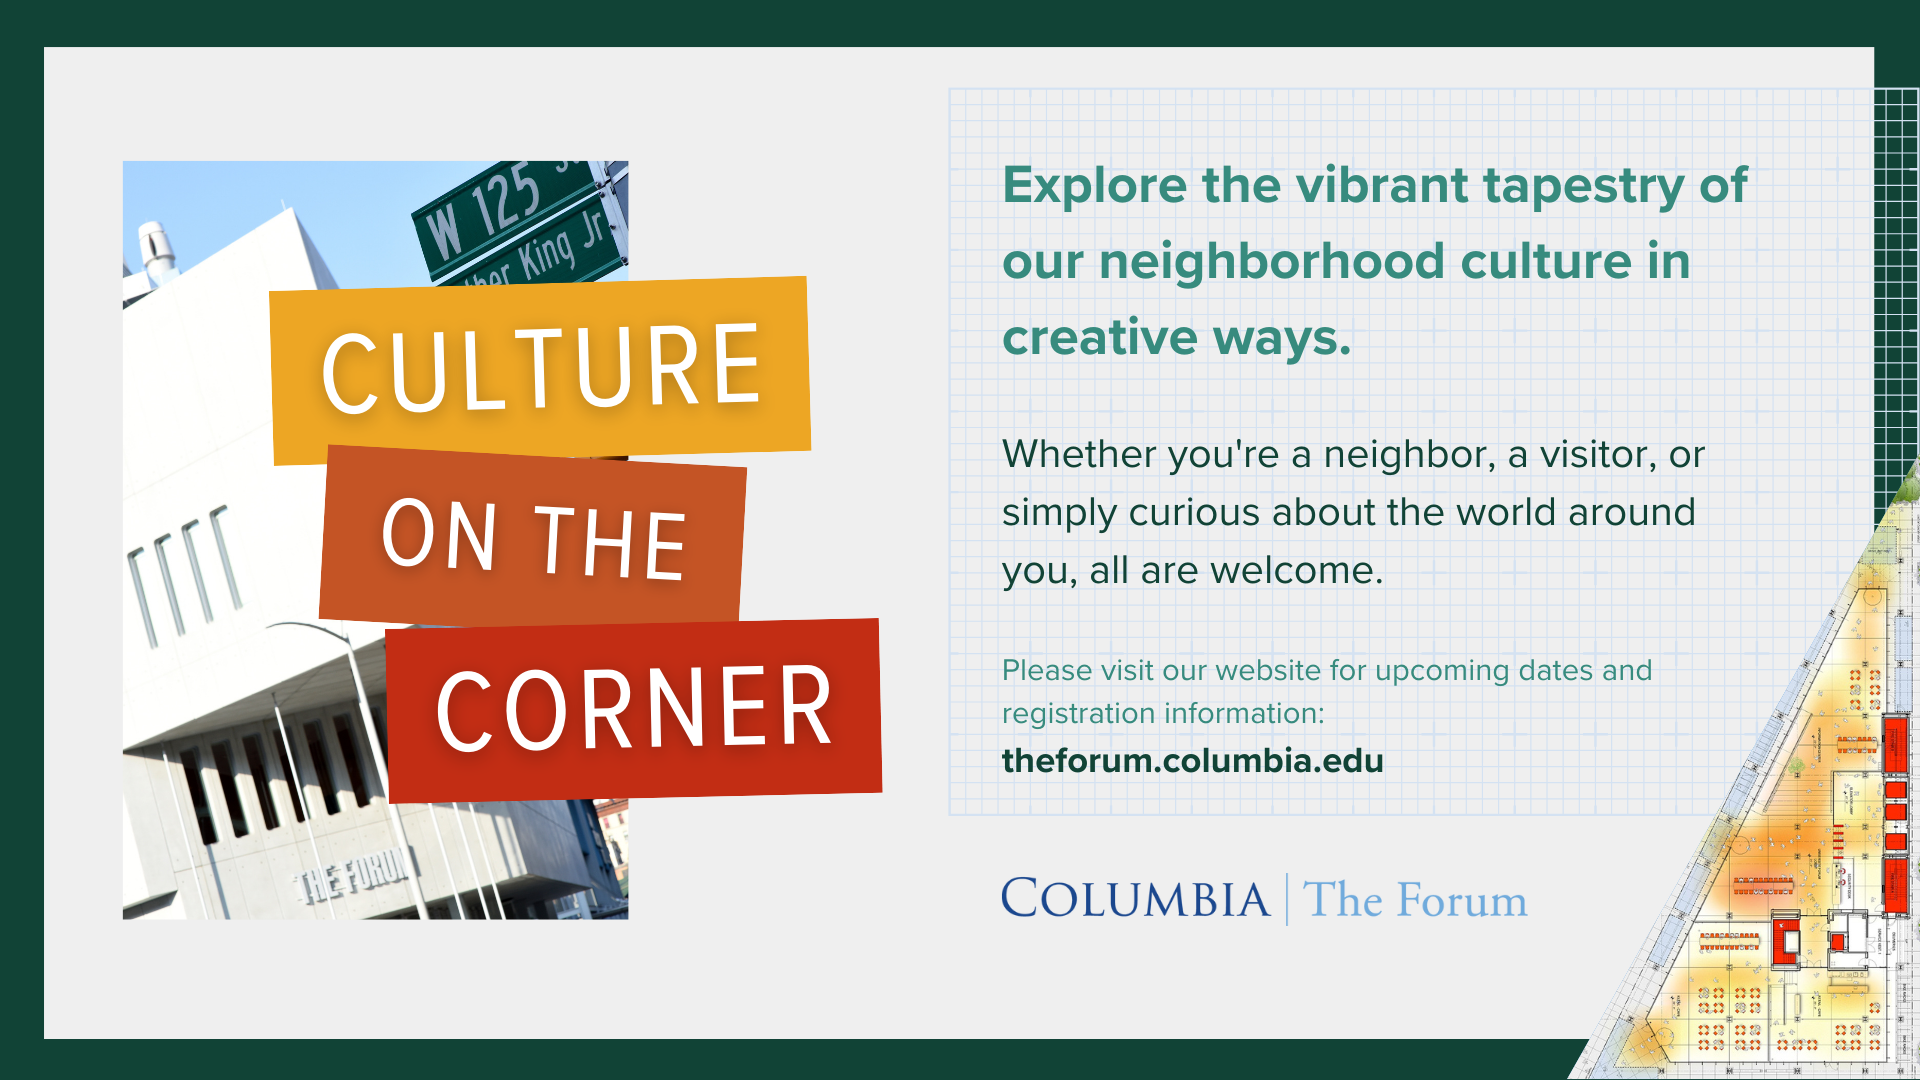 Culture on the Corner flyer depicting The Forum building and 125th Street sign